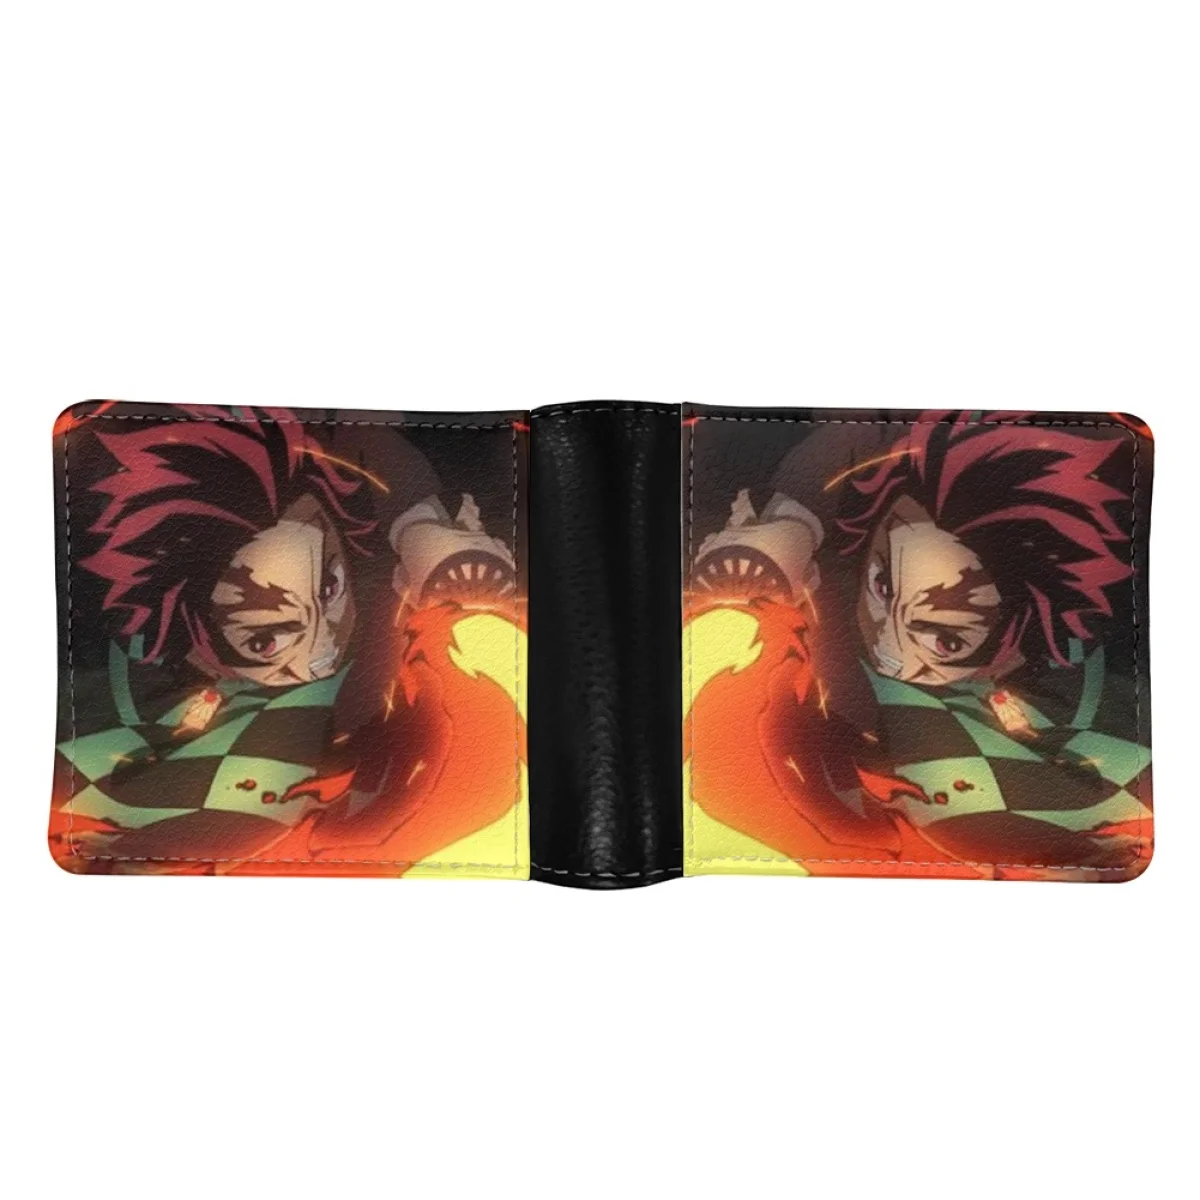 

FORUDESIGNS Mens Wallet Coin Purse Japanese Hot Anime Boy Printing Designer Black Pu Leather Credit Card Holder Money Bags New